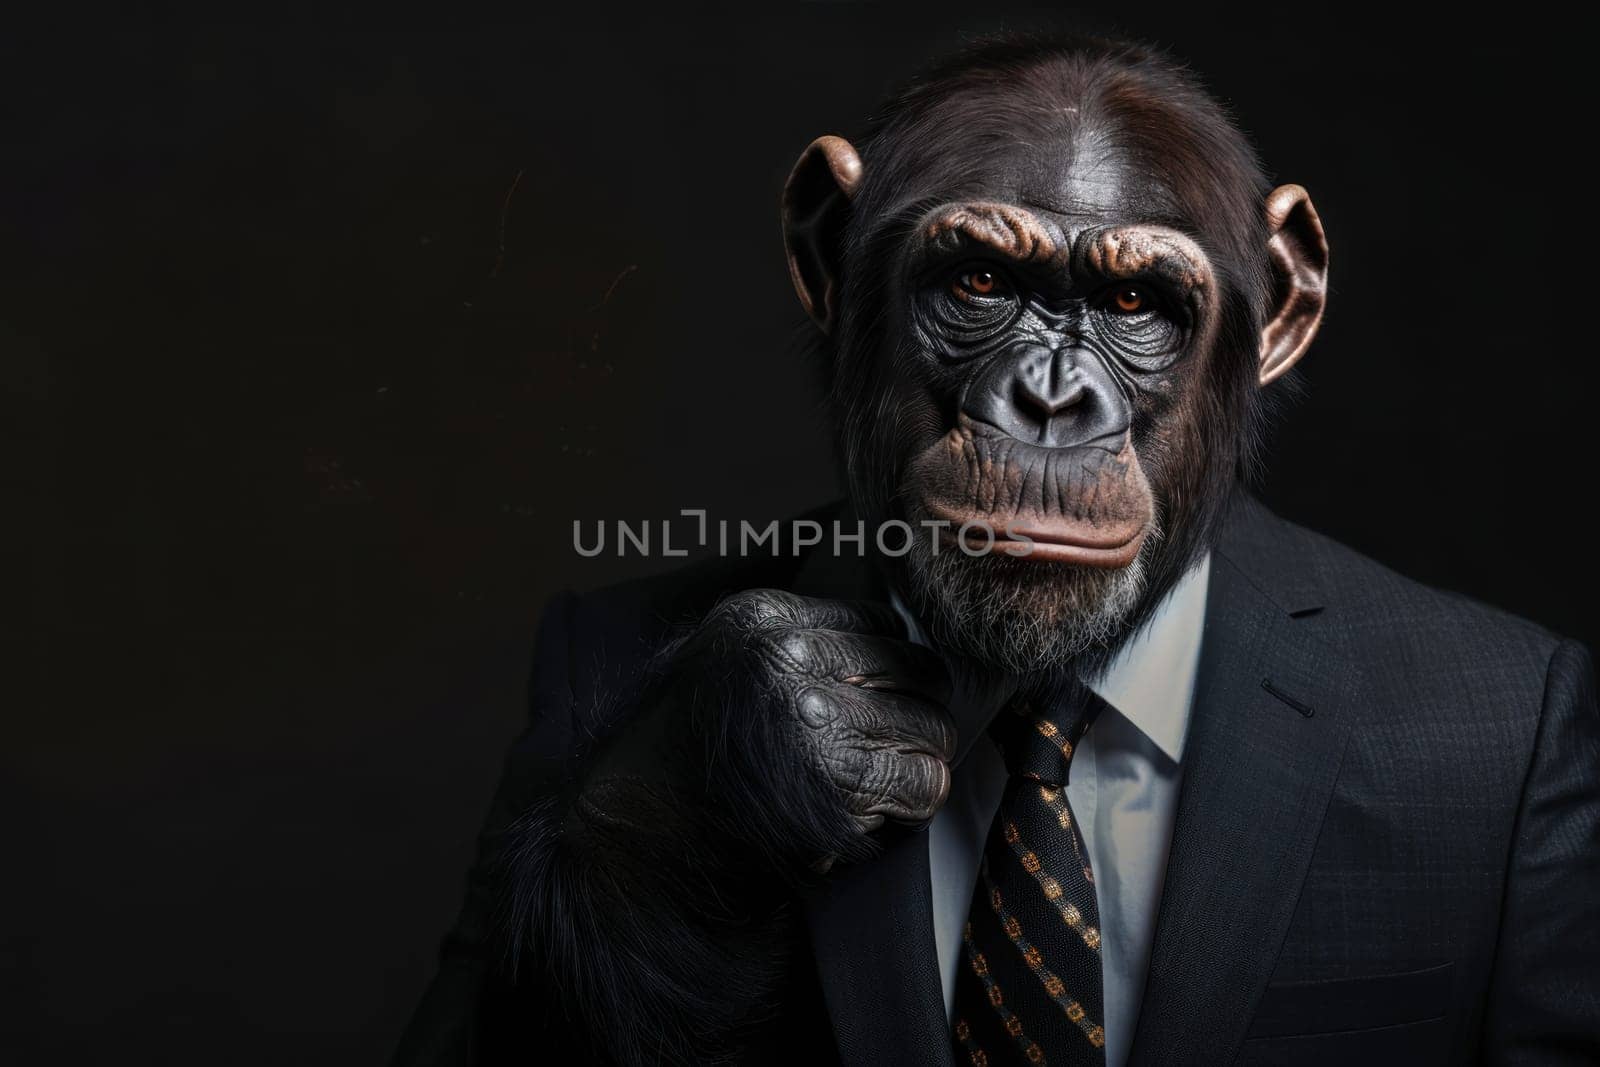 A monkey wearing a suit and tie is posing for a picture.